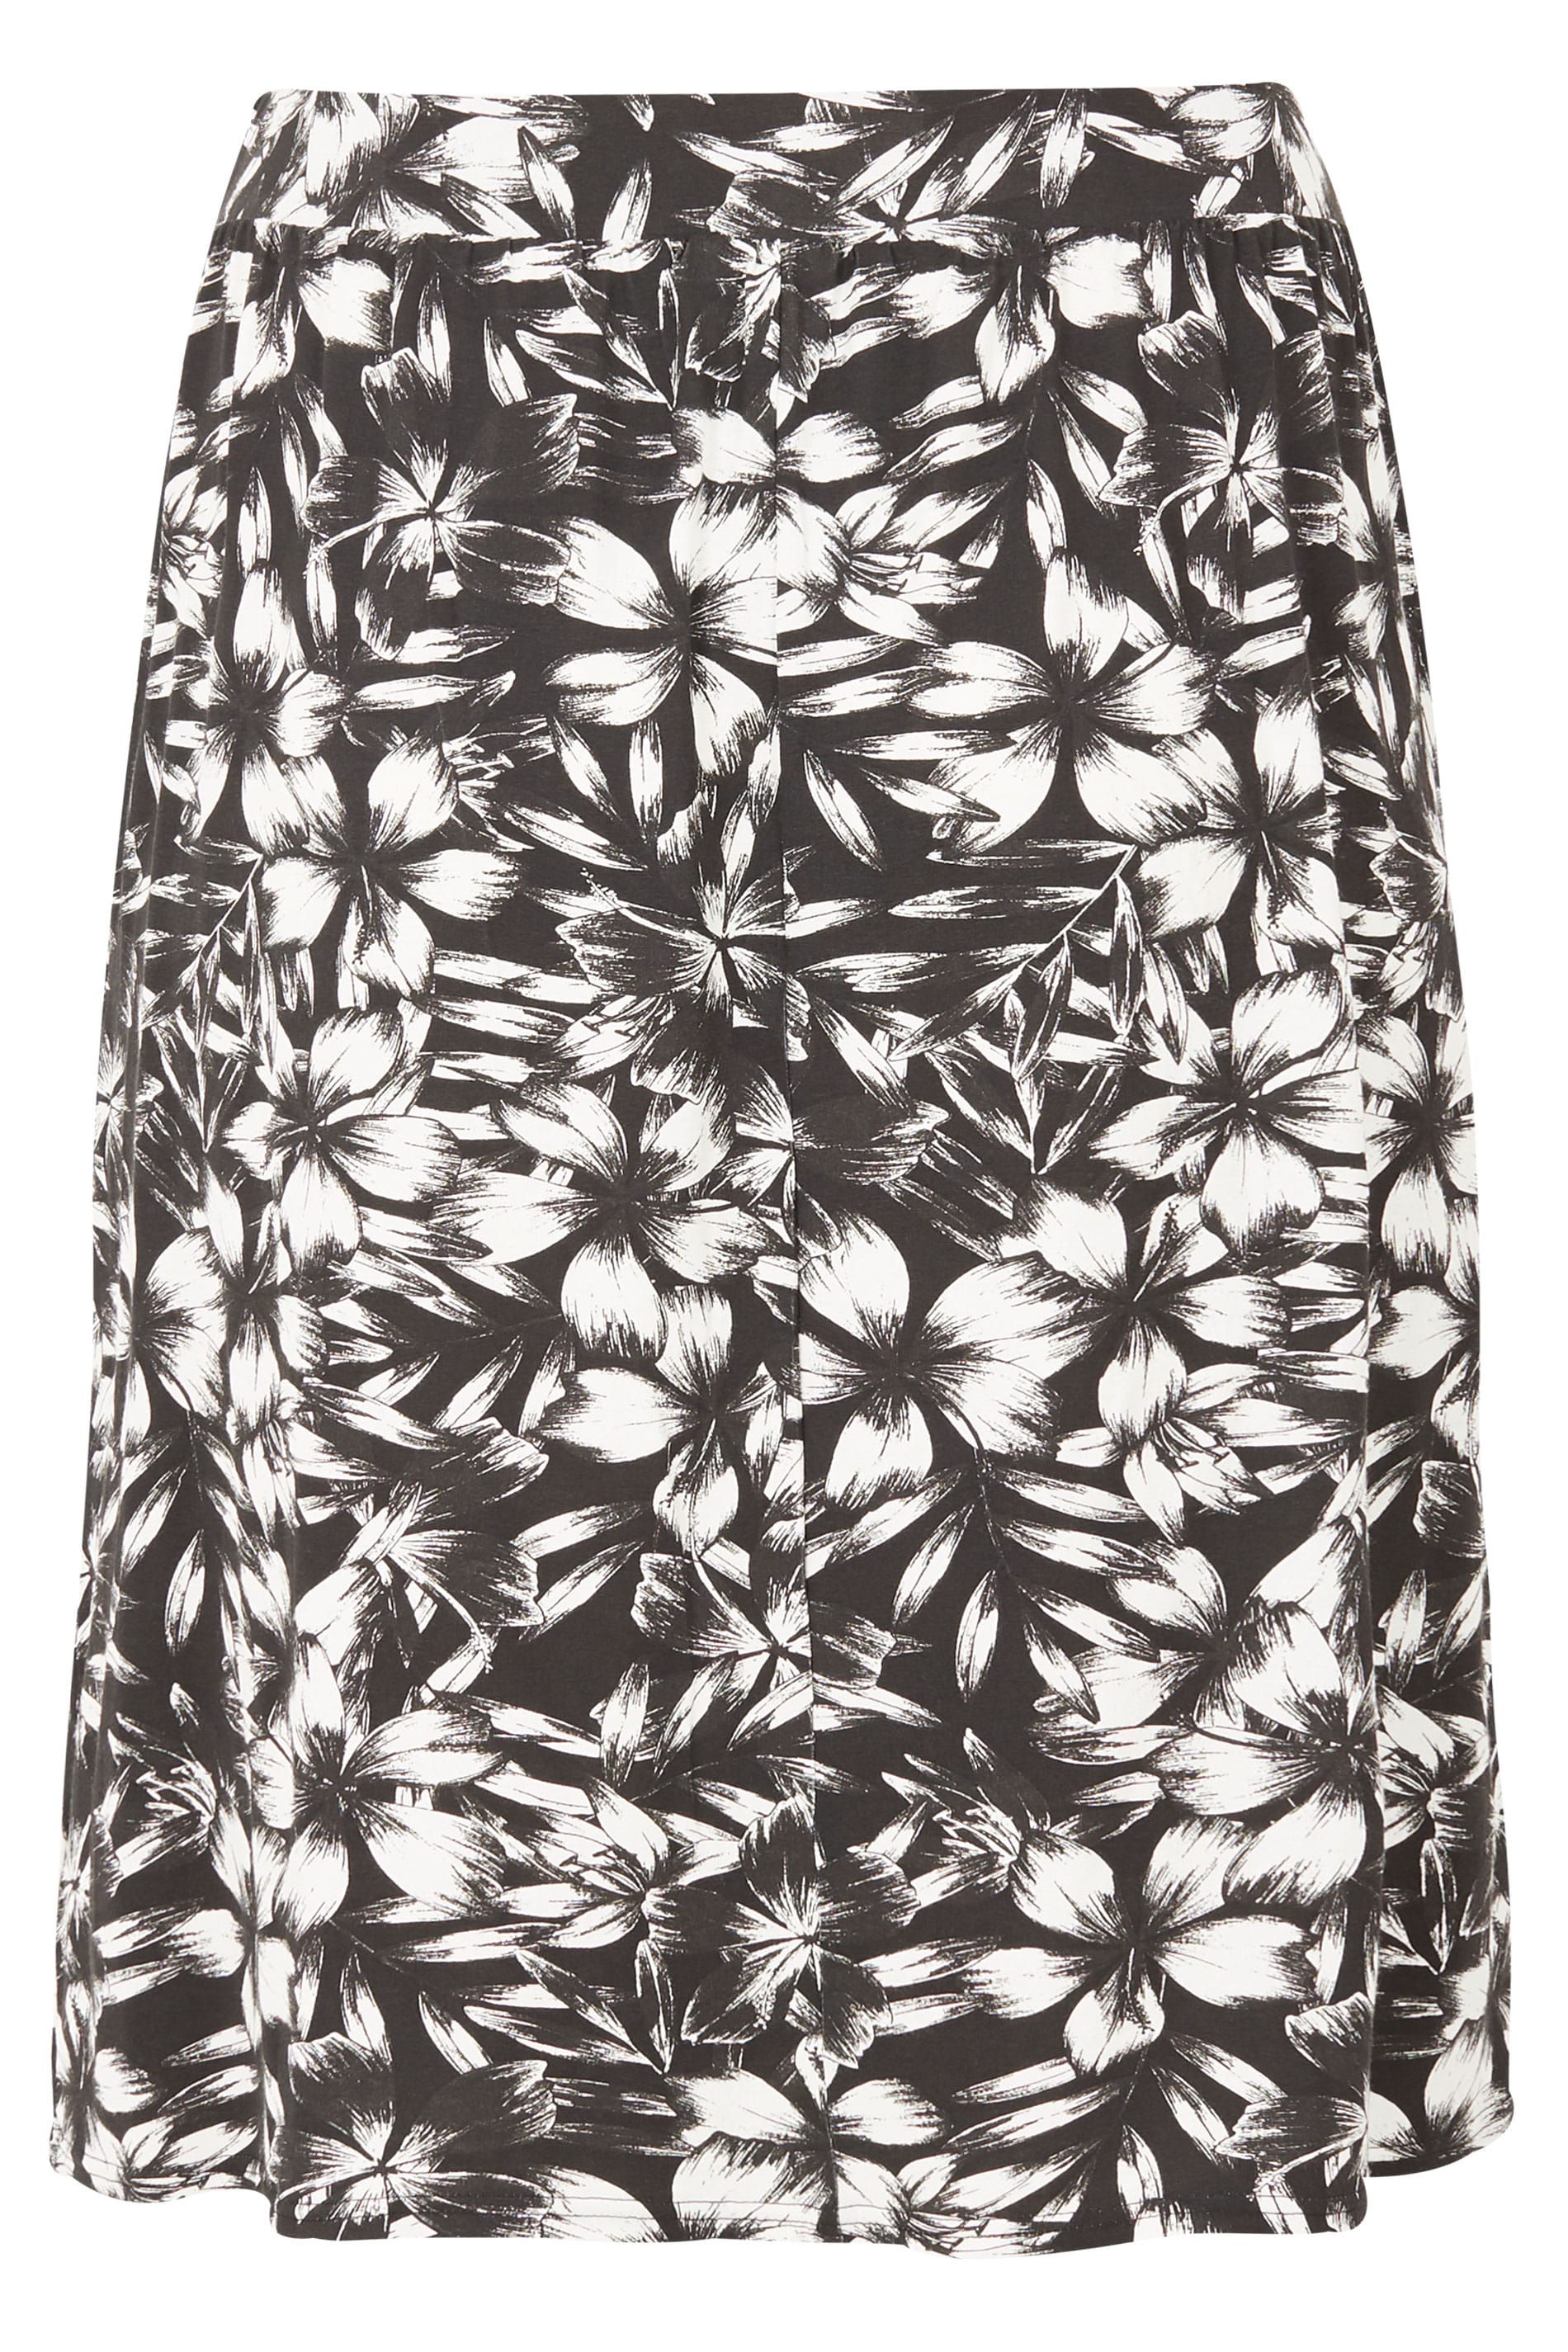 Black & White Floral Print Drape Skirt With Pockets, plus size 16 to 36